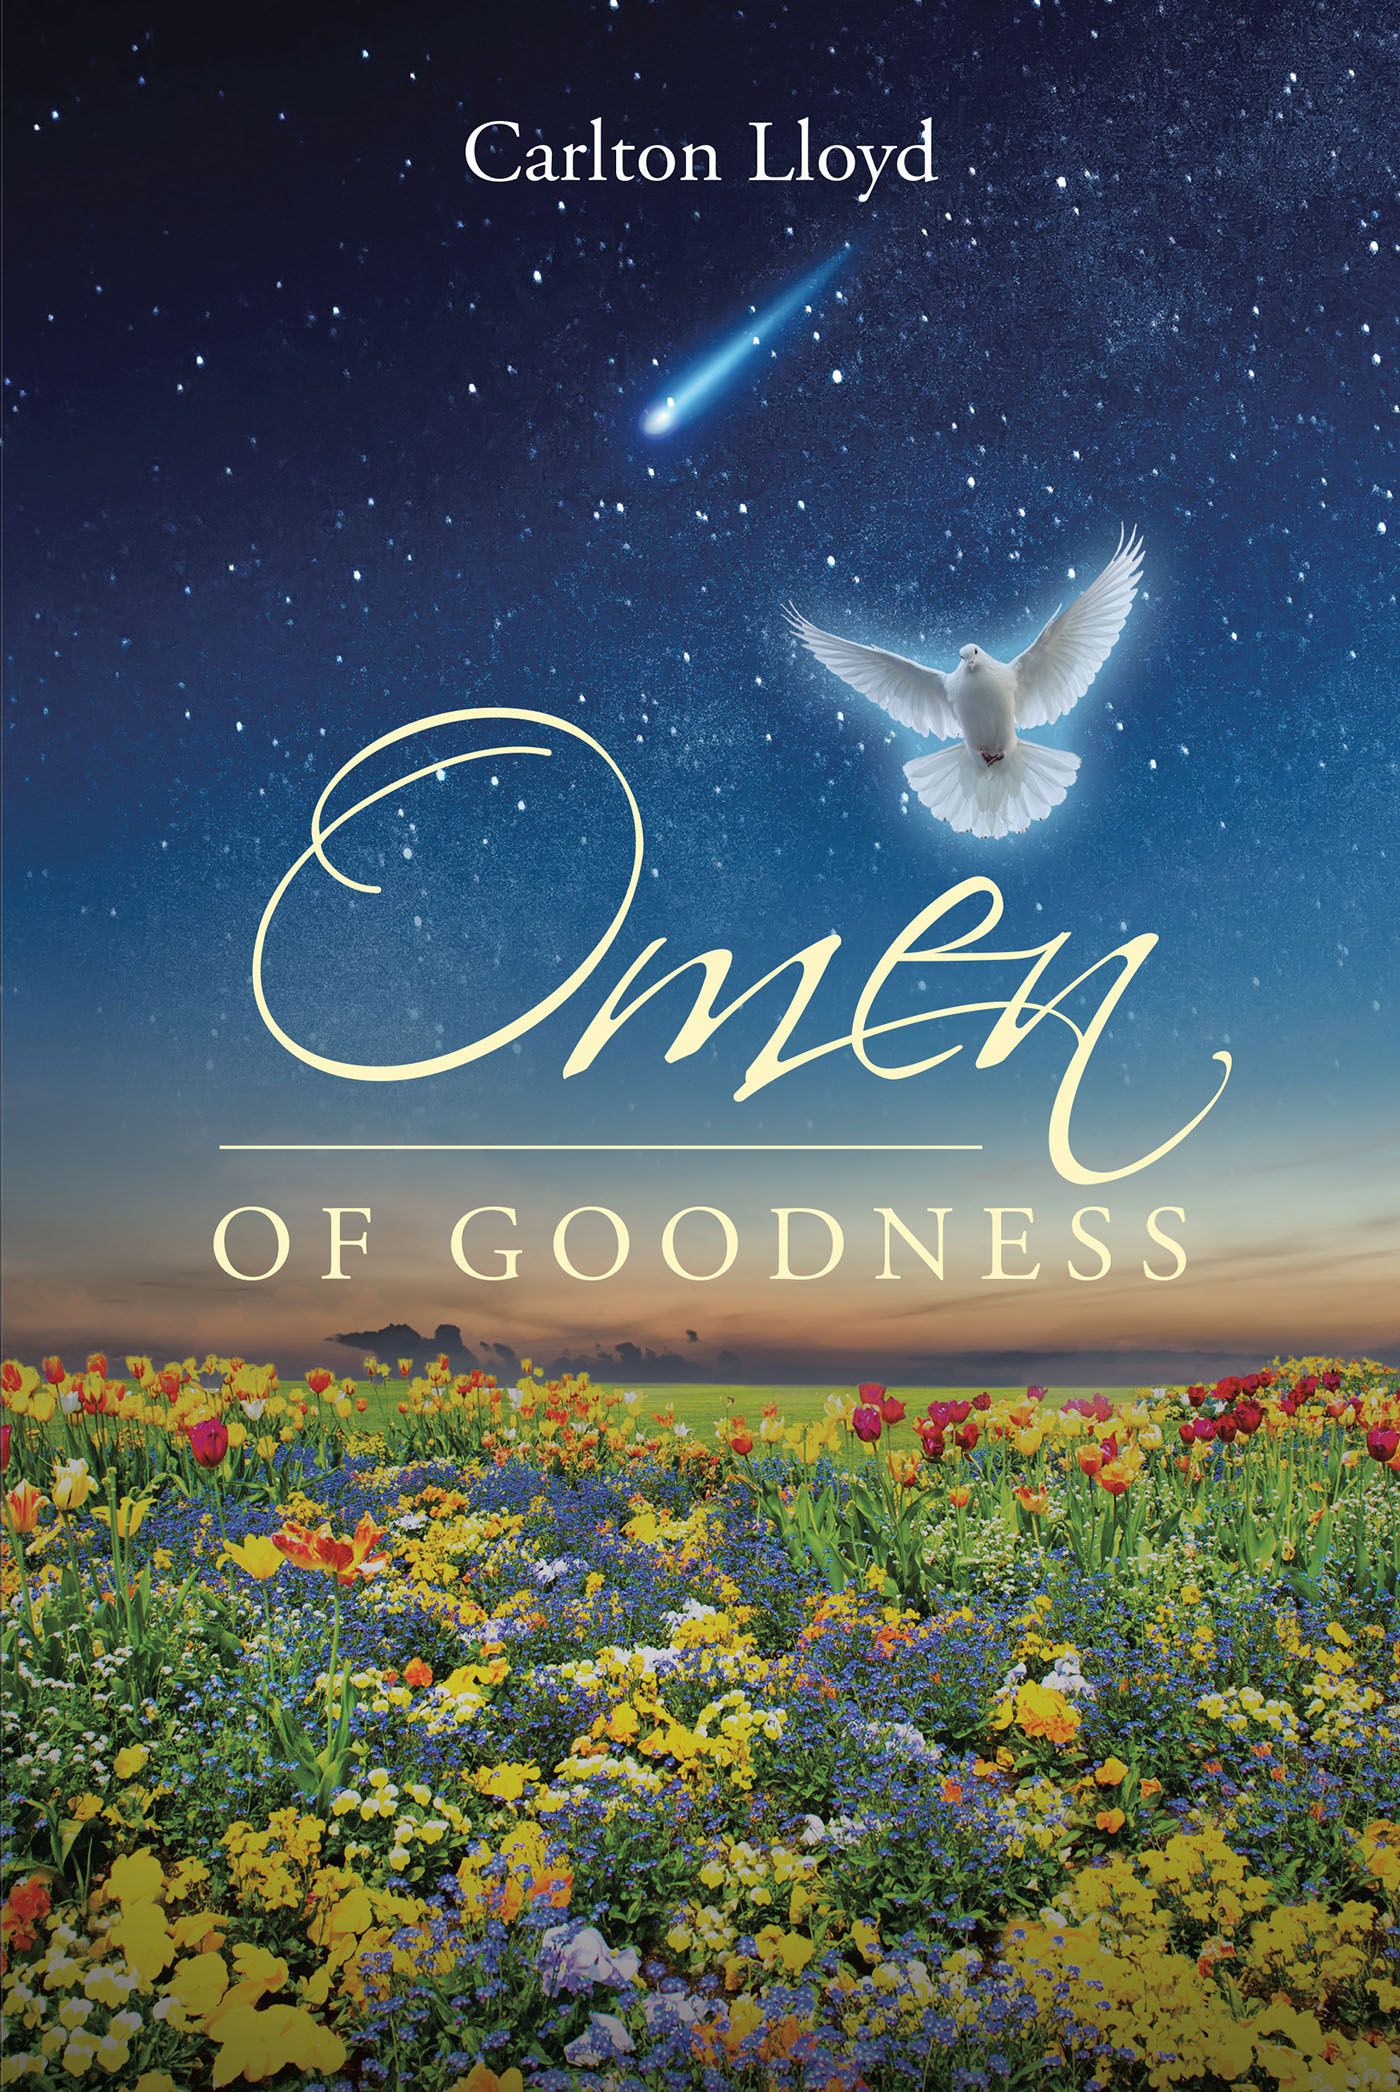 Carlton Lloyd’s Newly Released "Omen Of Goodness" is a Compelling Selection of Poetry Inspired by Careful Observation and Reflection